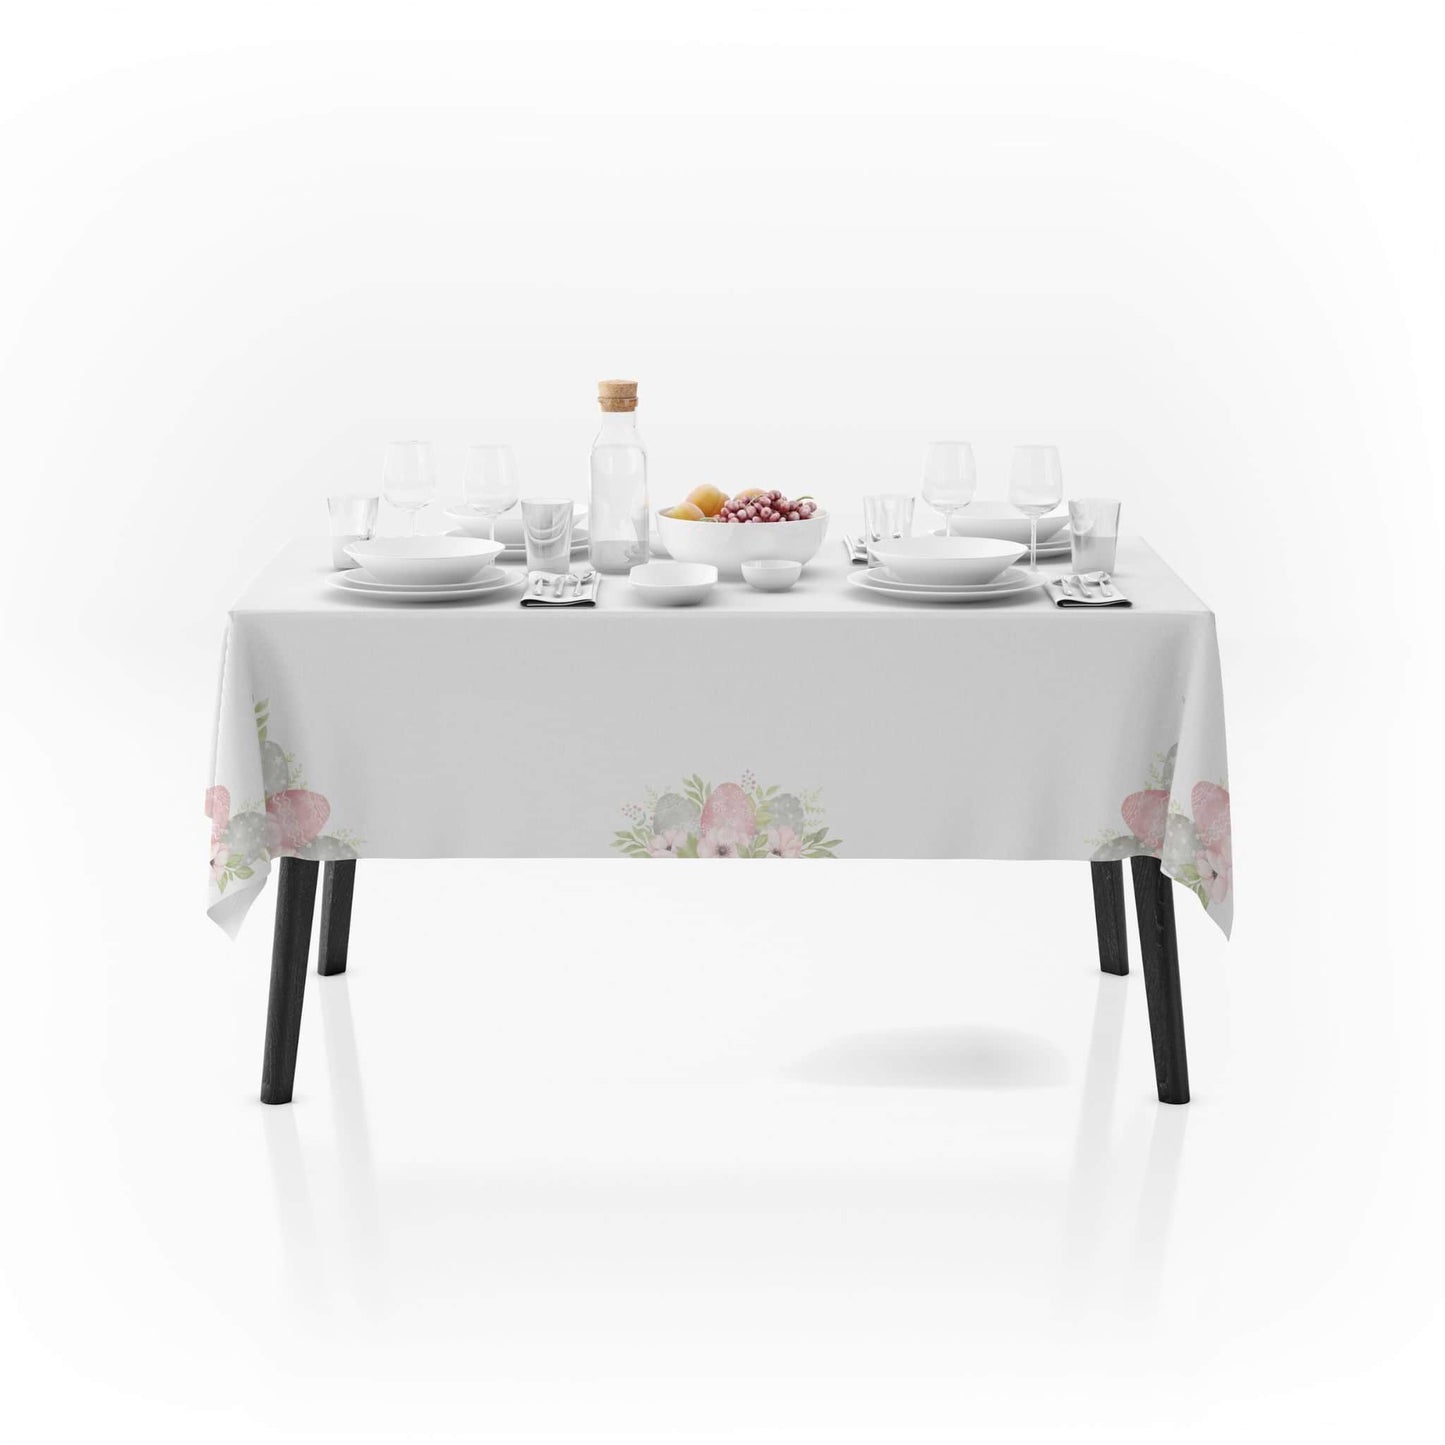 Eggciting Easter Bunny Tablecloth - ZumBuys